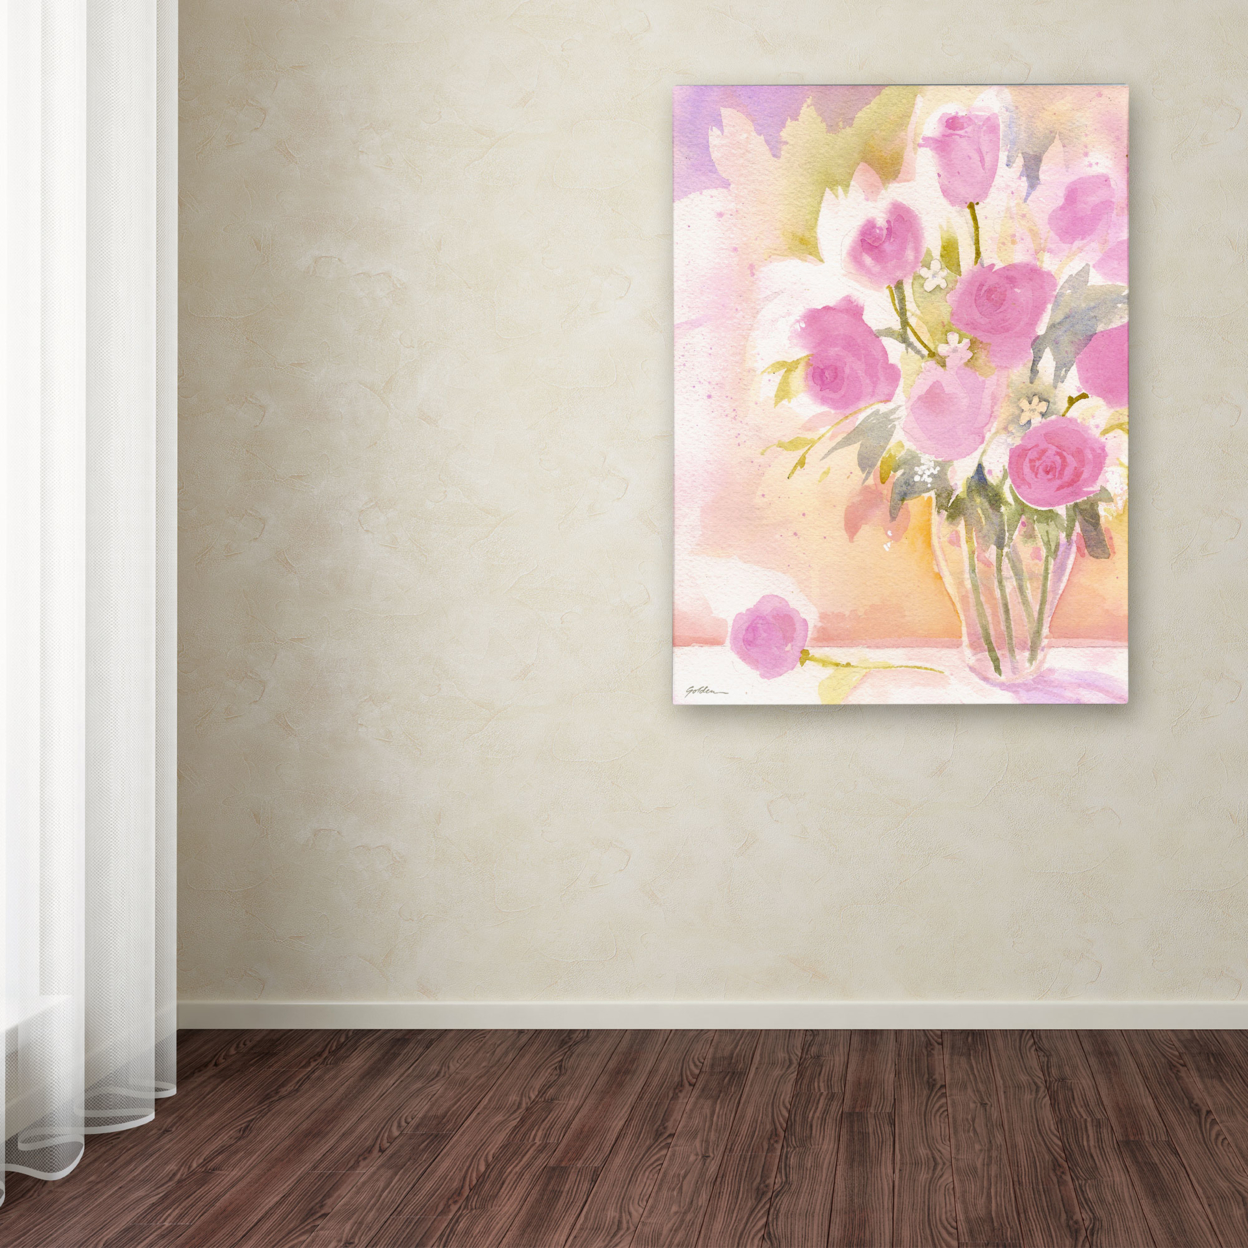 Sheila Golden 'Vase With Pink Roses' Canvas Art 18 X 24